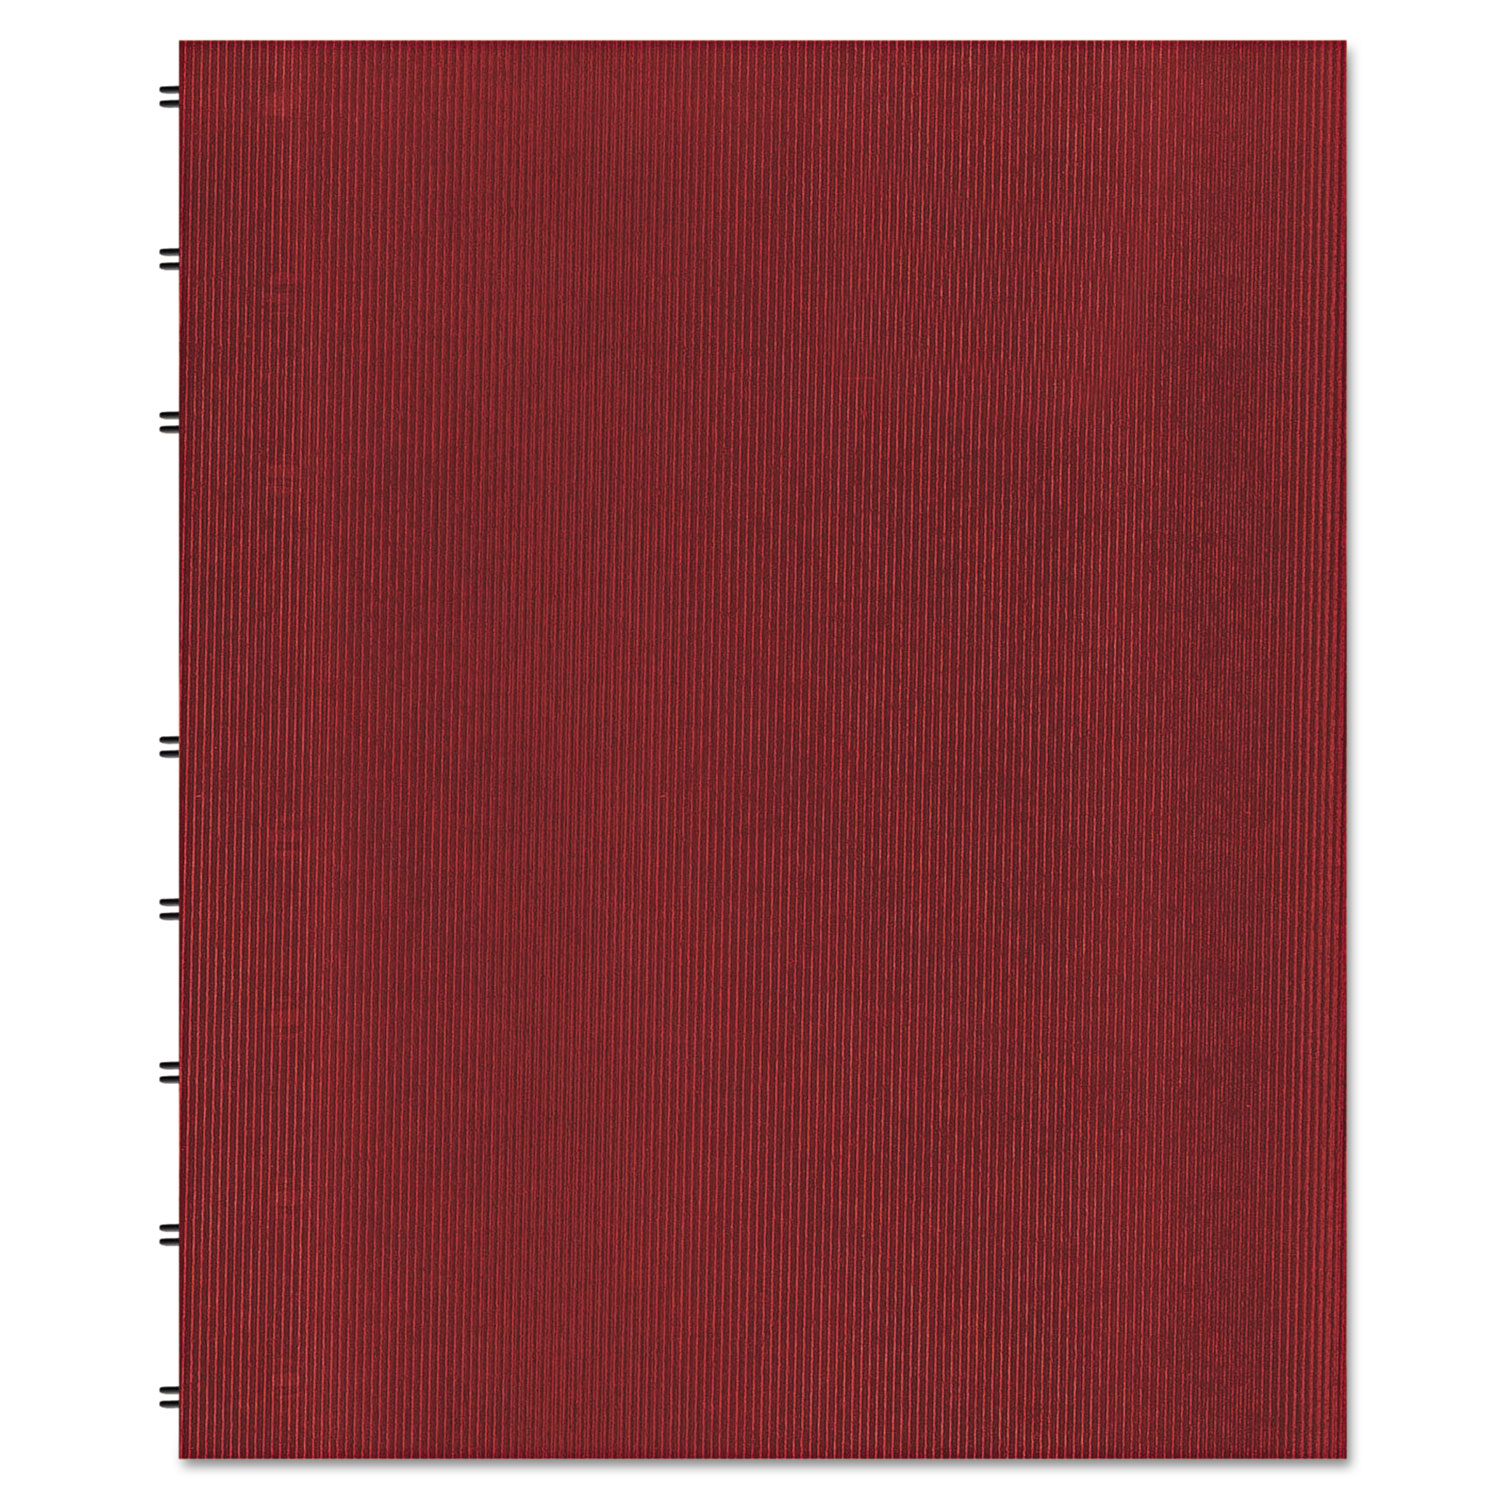 MiracleBind Notebook, 1 Subject, Medium/College Rule, Red Cover, 11 x 9.06, 75 Pages